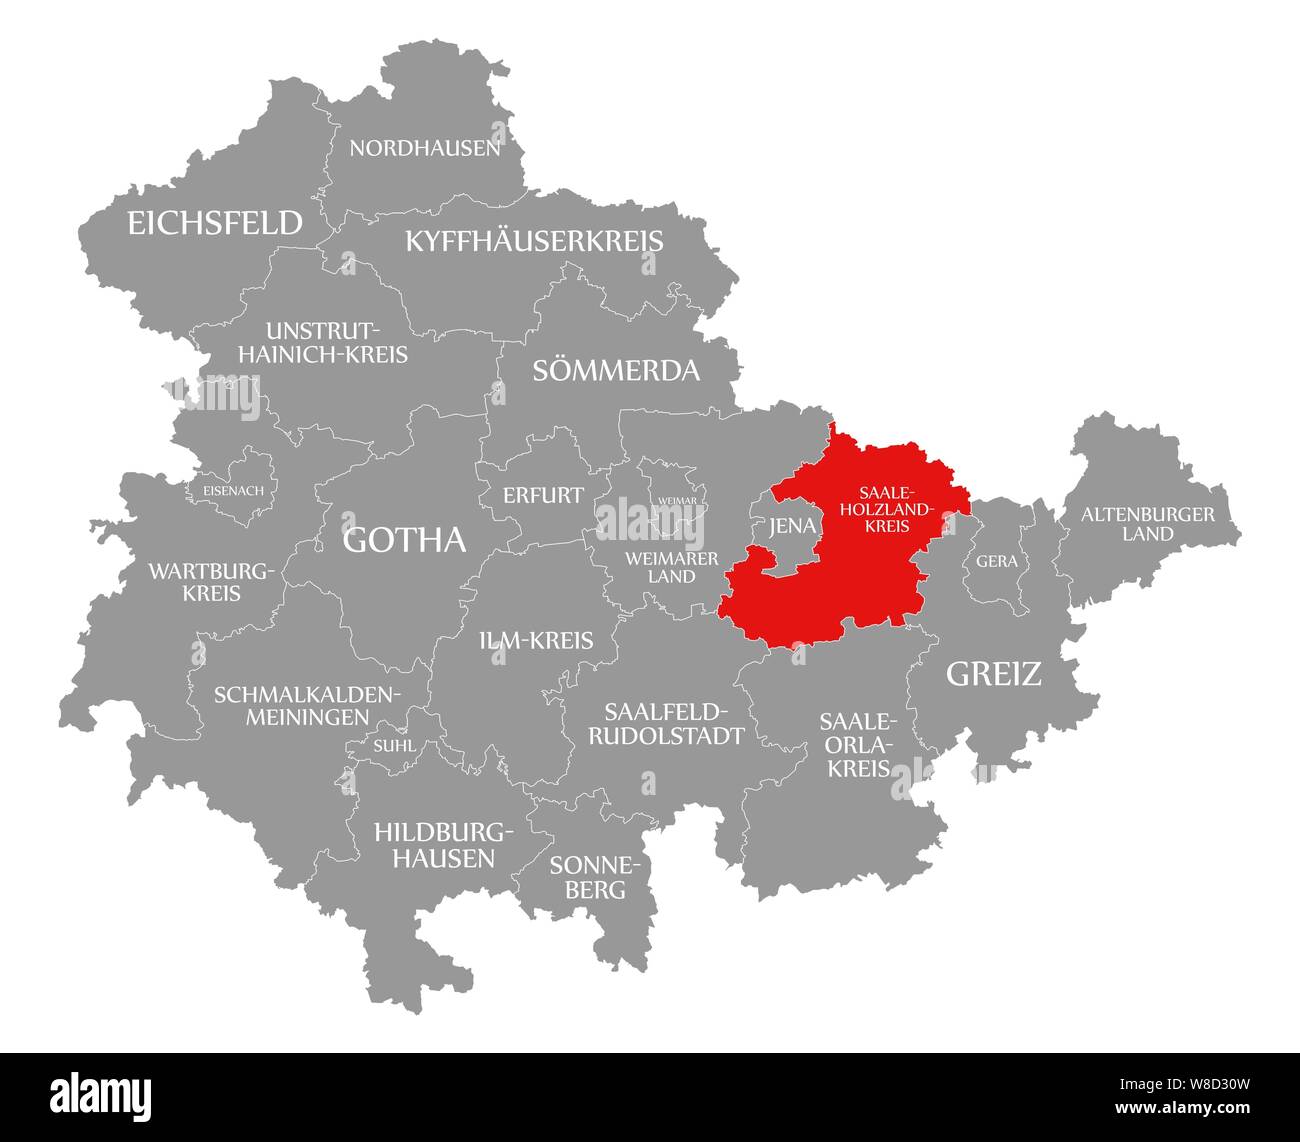 Saale-Holzland-Kreis red highlighted in map of Thuringia Germany Stock Photo